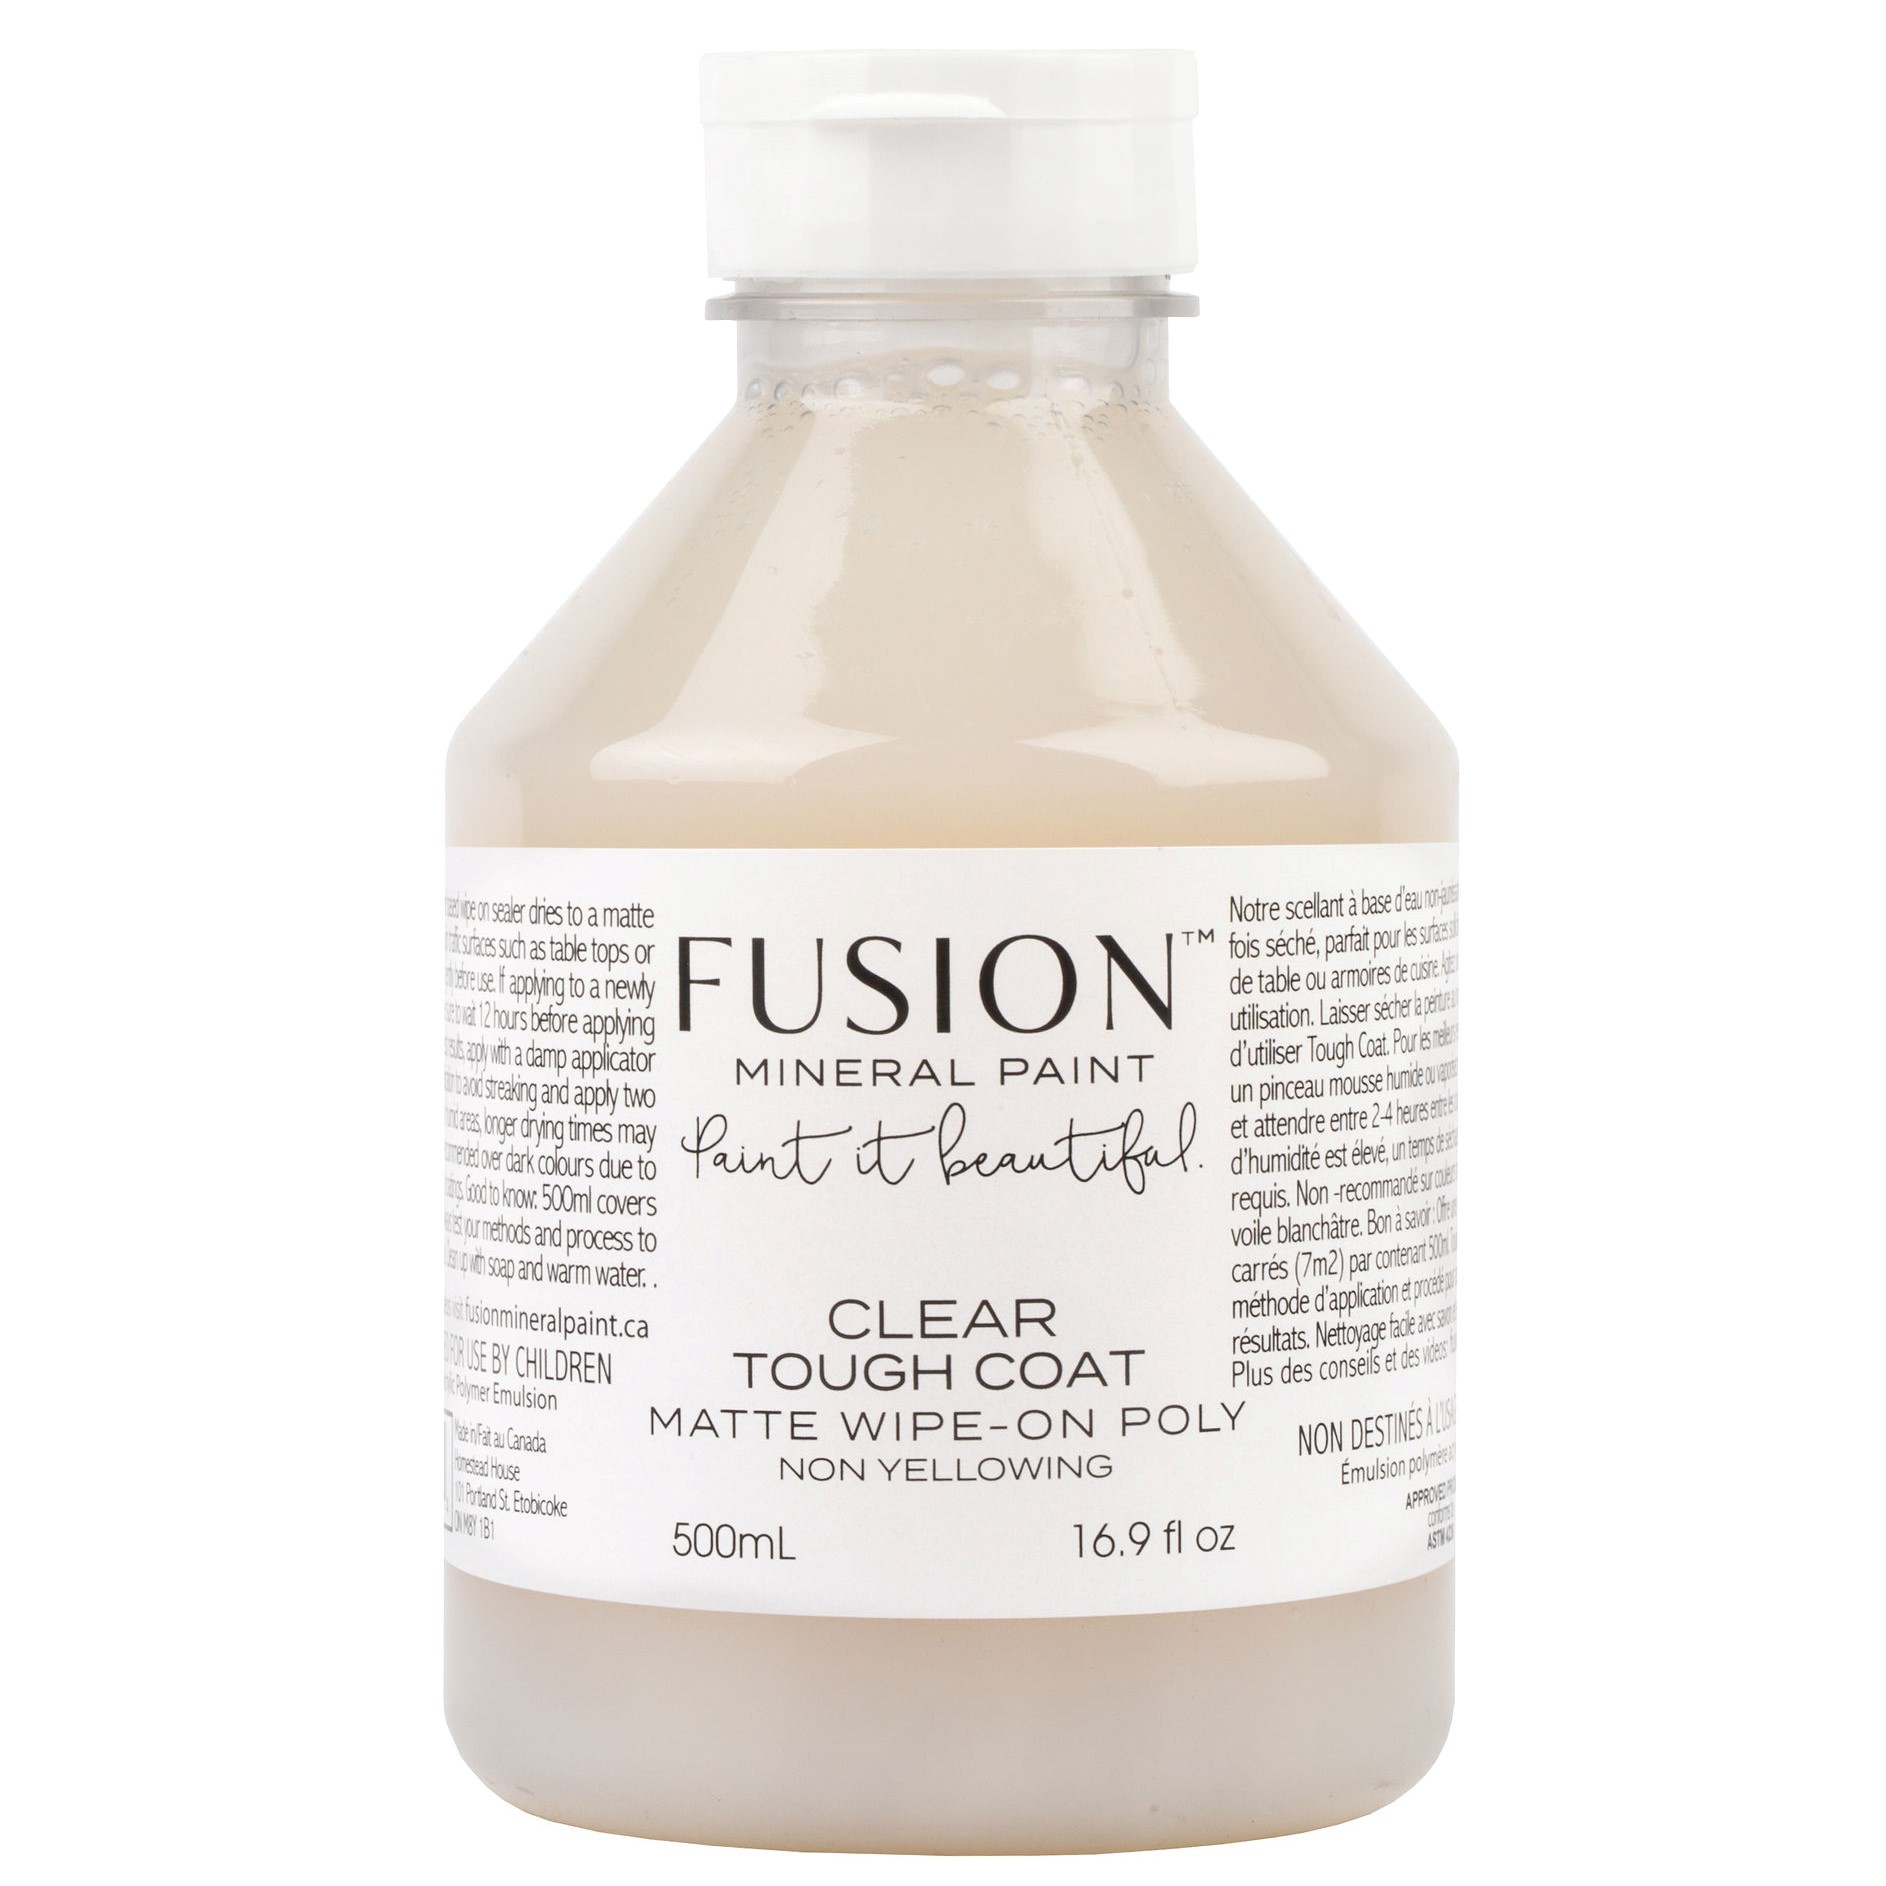 Tough Coat fusion mineral paint Goed Gestyled Brielle